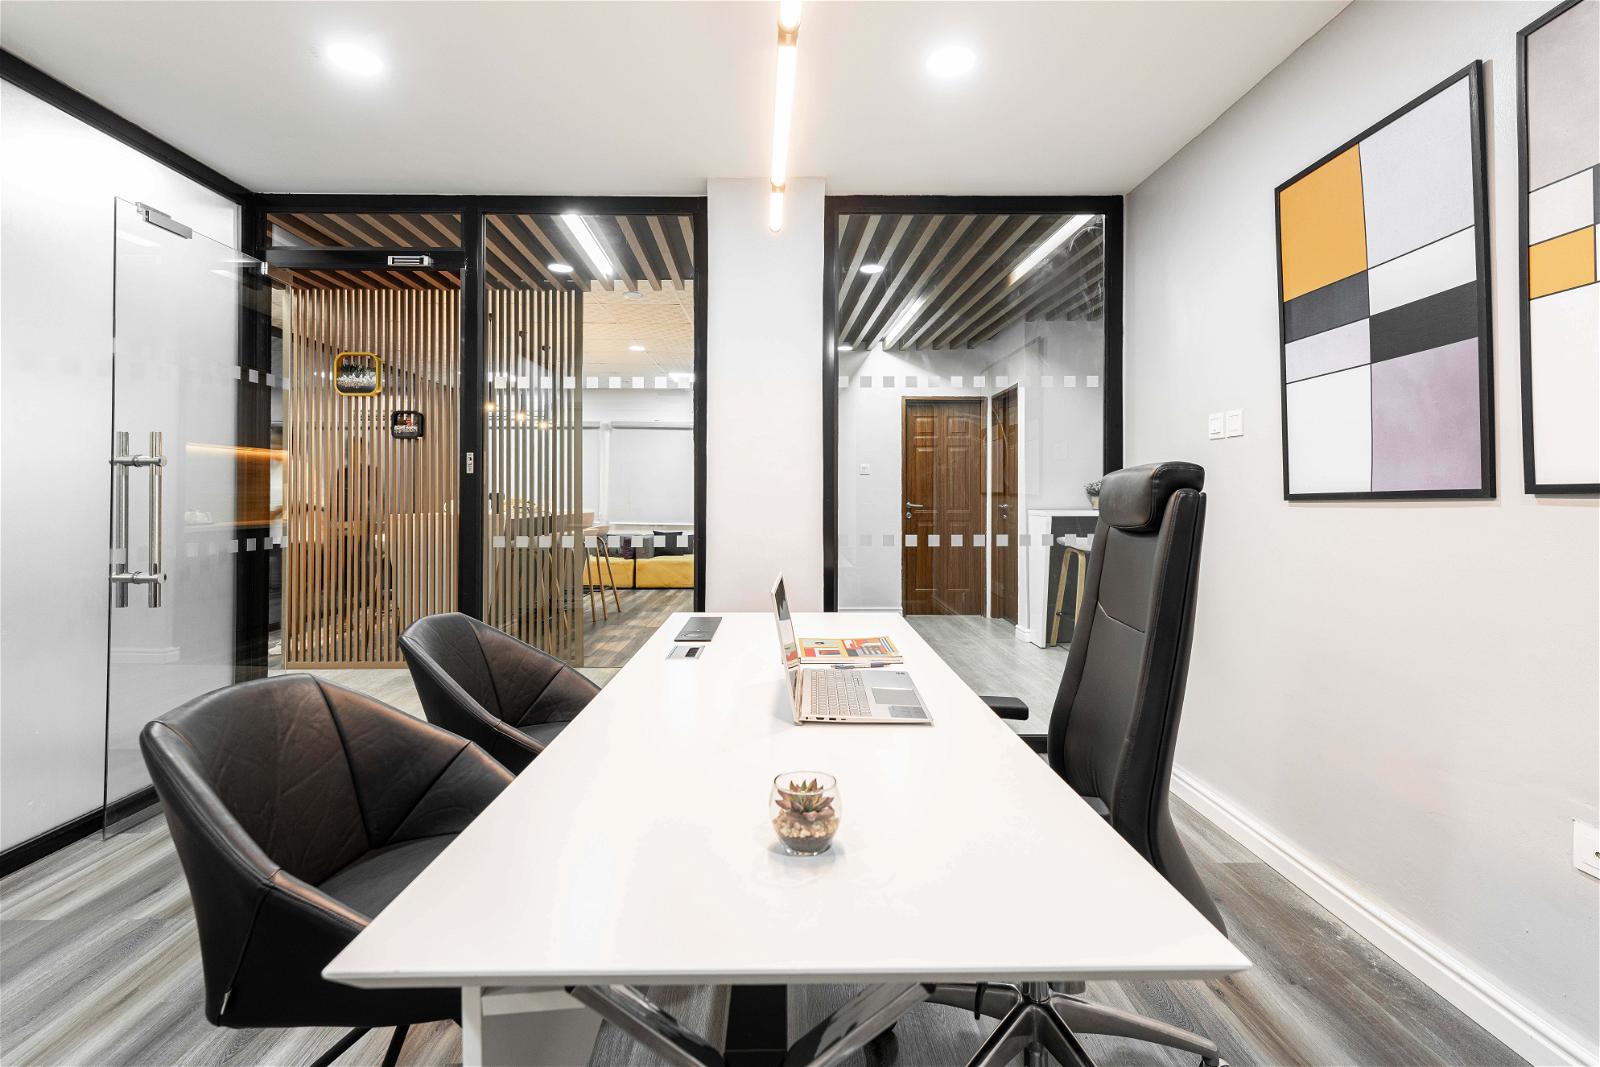 Challenger bank, Kuda, gets exciting new office space, created by Spazio Ideale